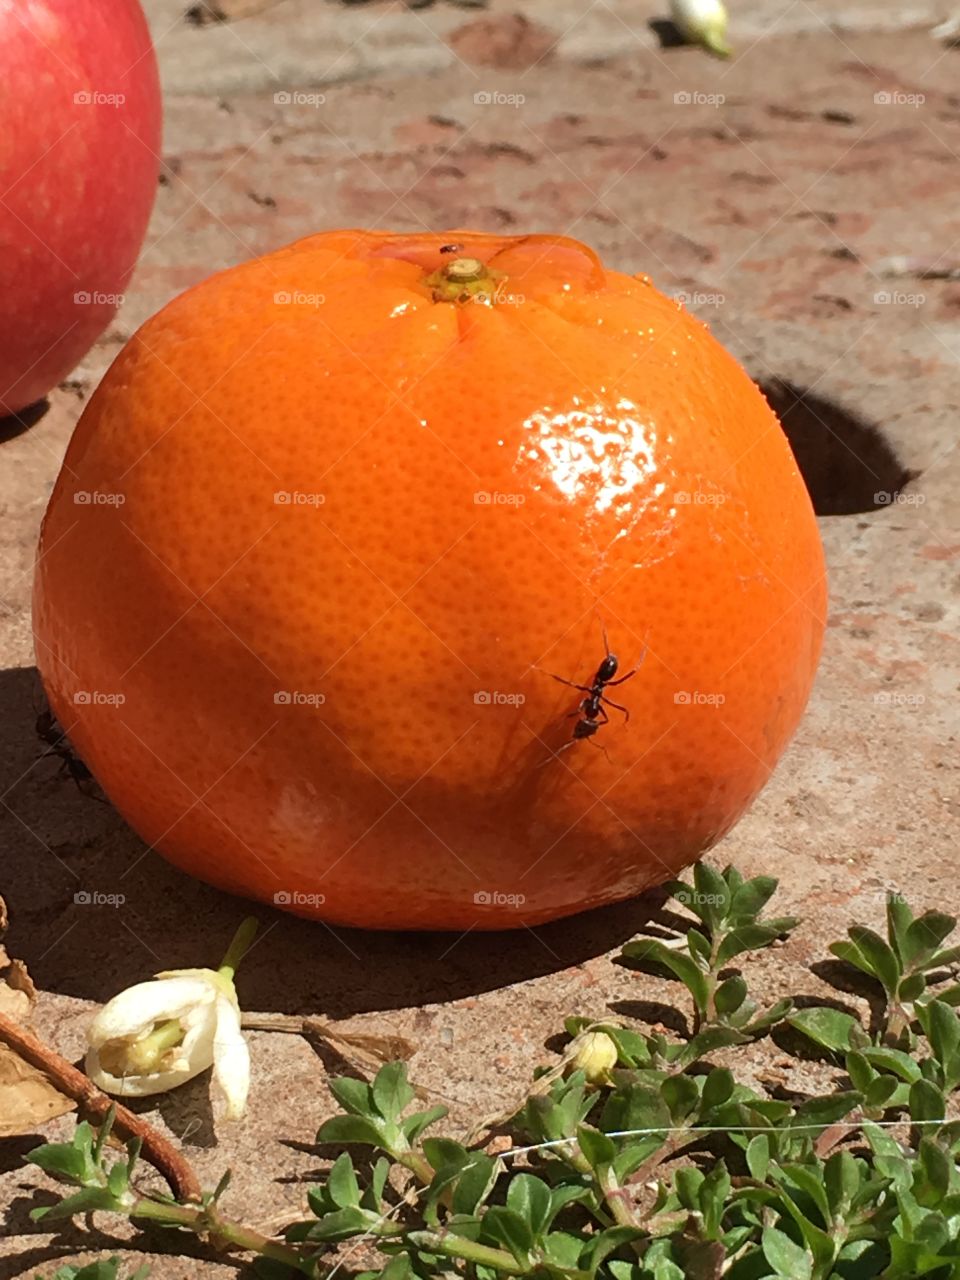 Worker ant on a bright round whole orange